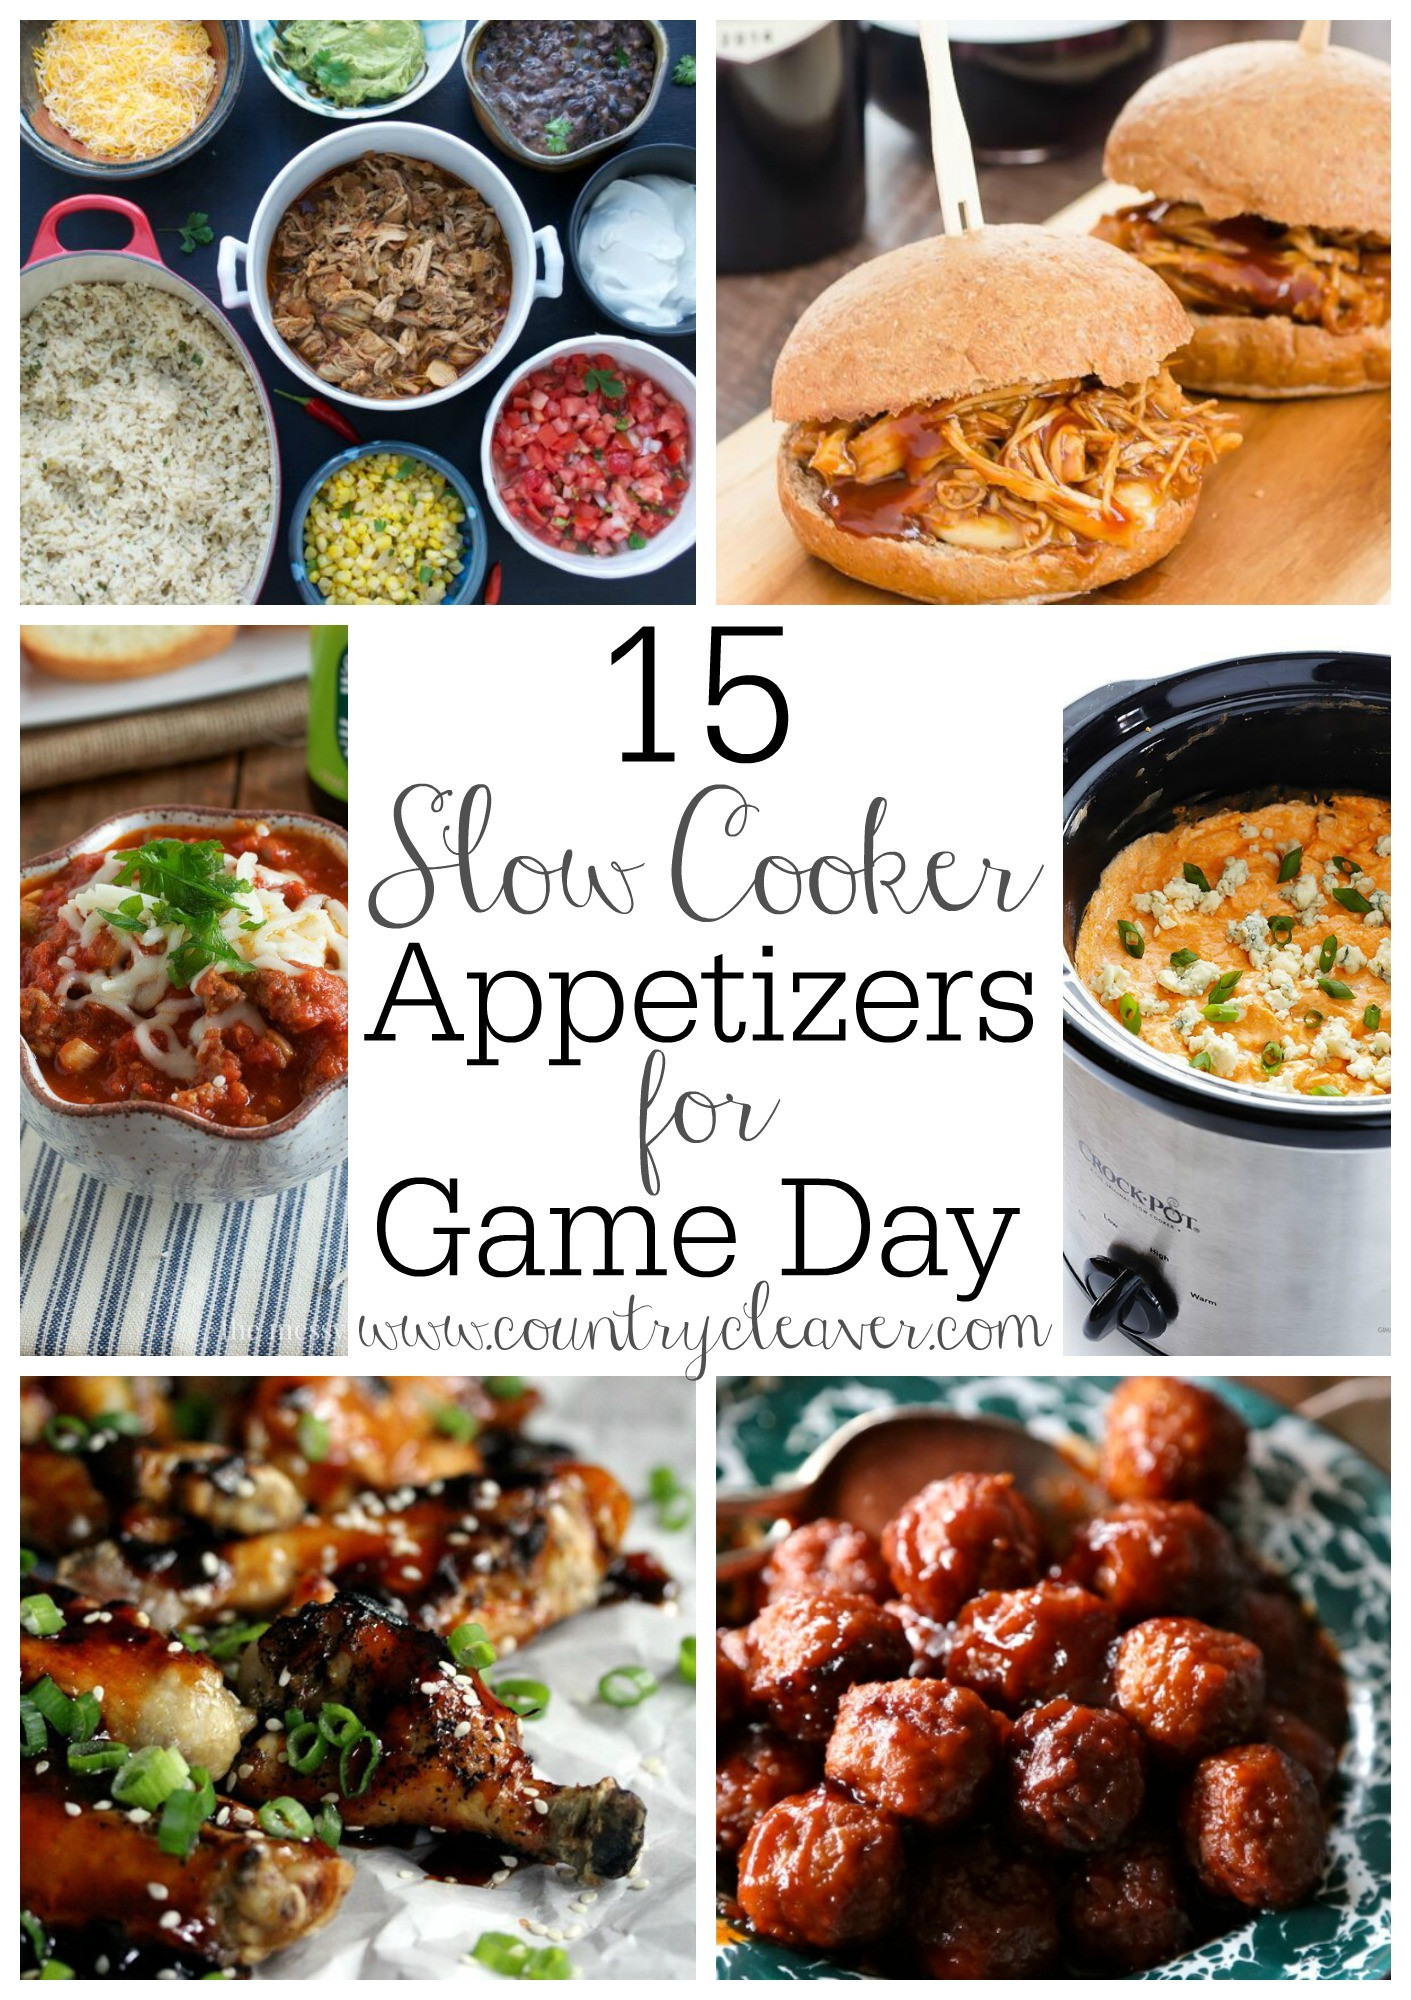 Slow Cooker Appetizer Recipes
 15 Slow Cooker Appetizers for Game Day Country Cleaver